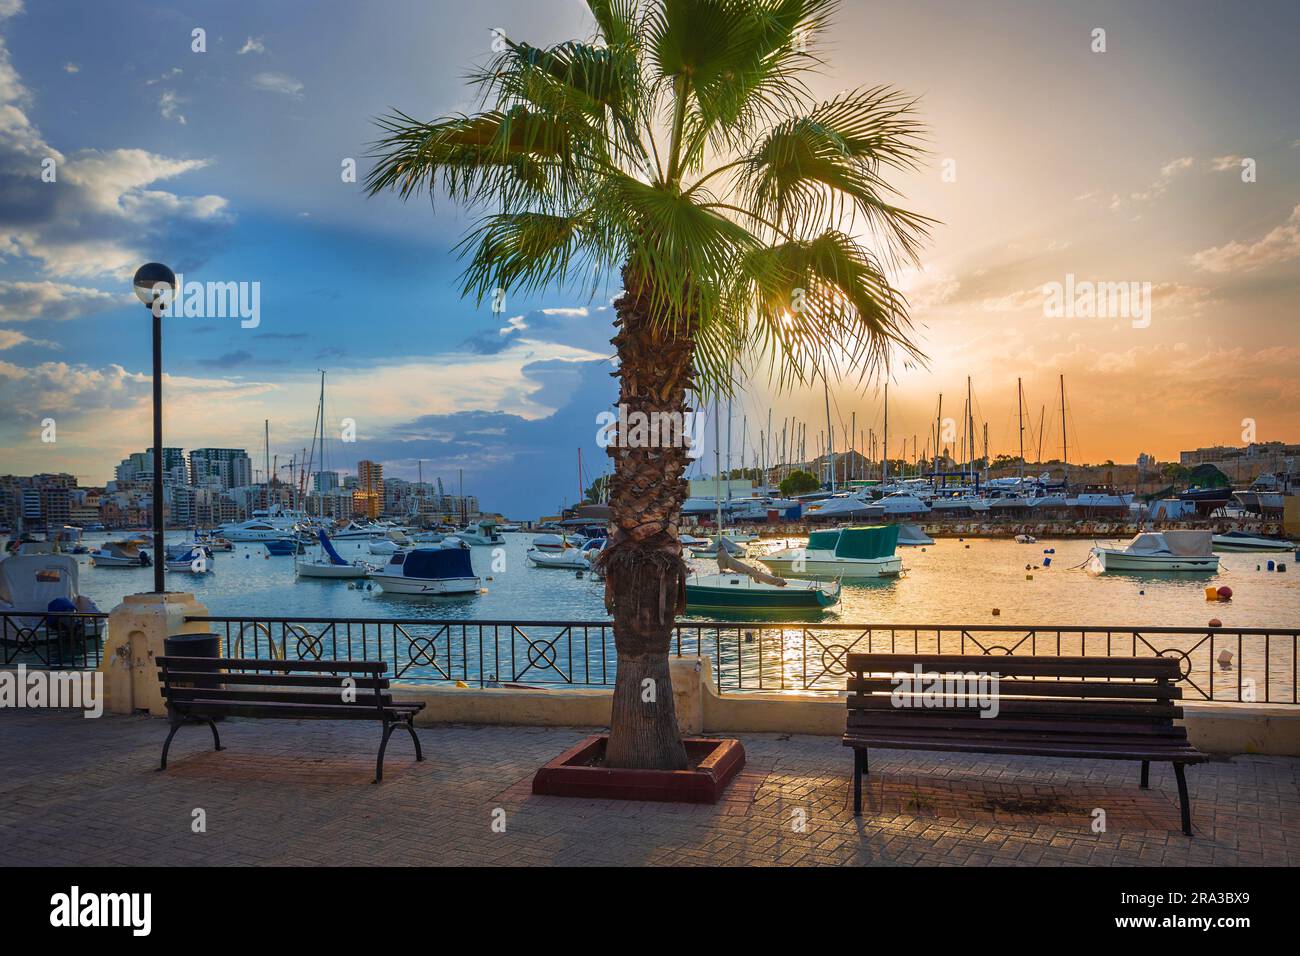 Sliema, Malta - Beautiful sunrise with two benches, a palm tree, residential houses and boats mooring at Sliema Bay on a summer morning with blue sky Stock Photo